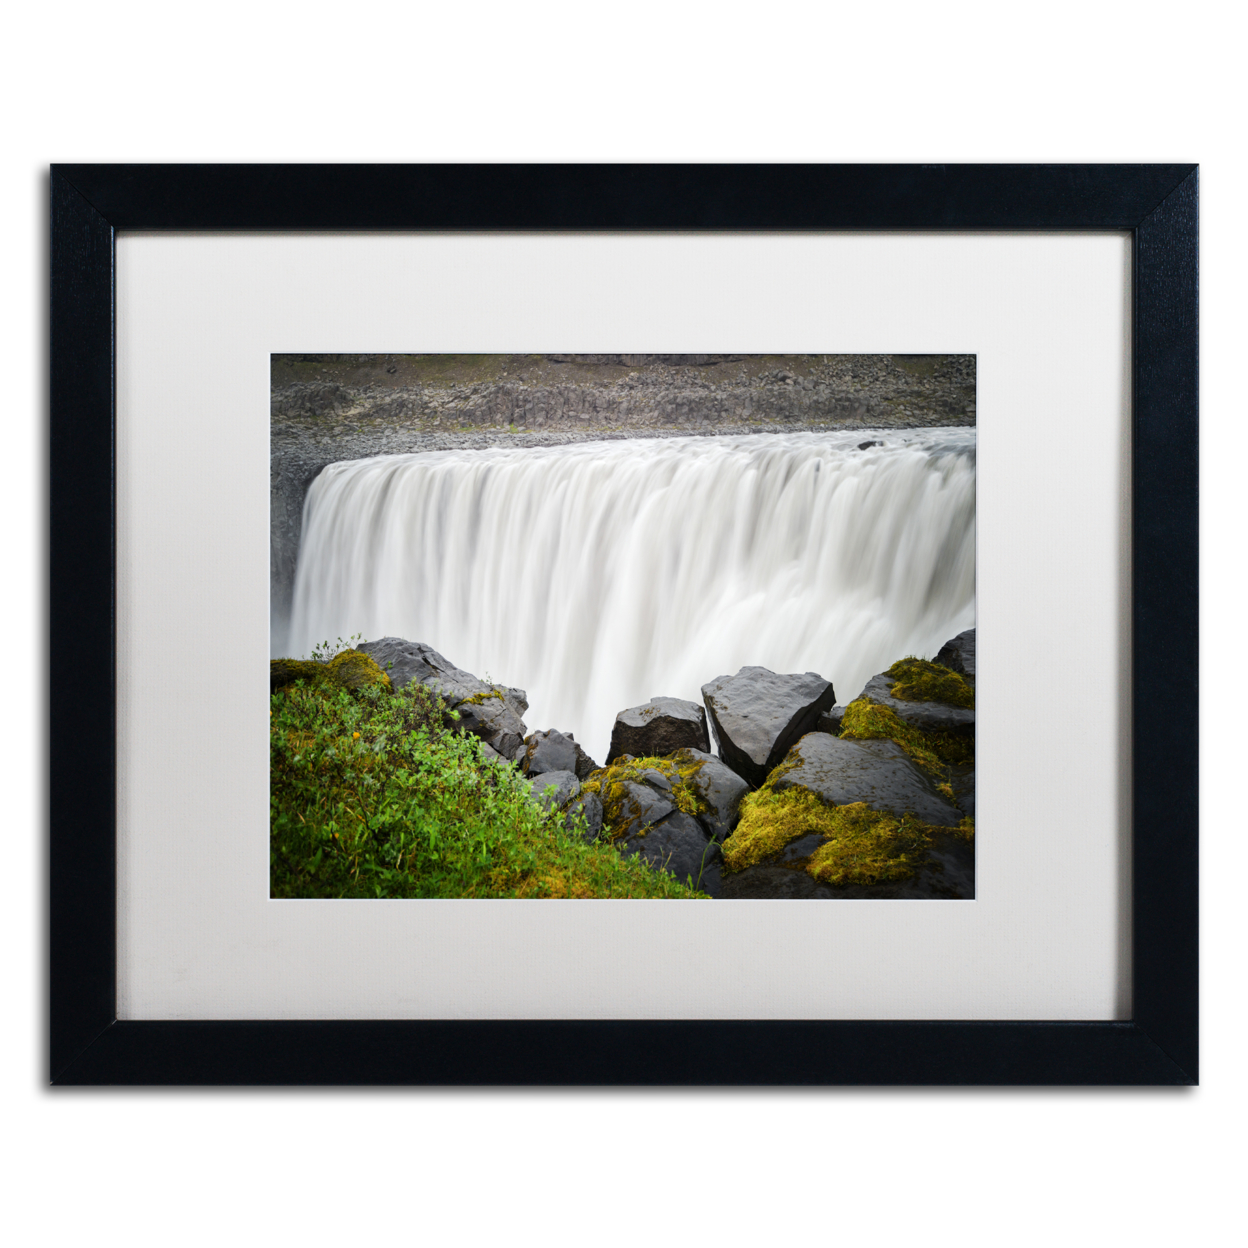 Philippe Sainte-Laudy 'Painterly Falls' Black Wooden Framed Art 18 X 22 Inches